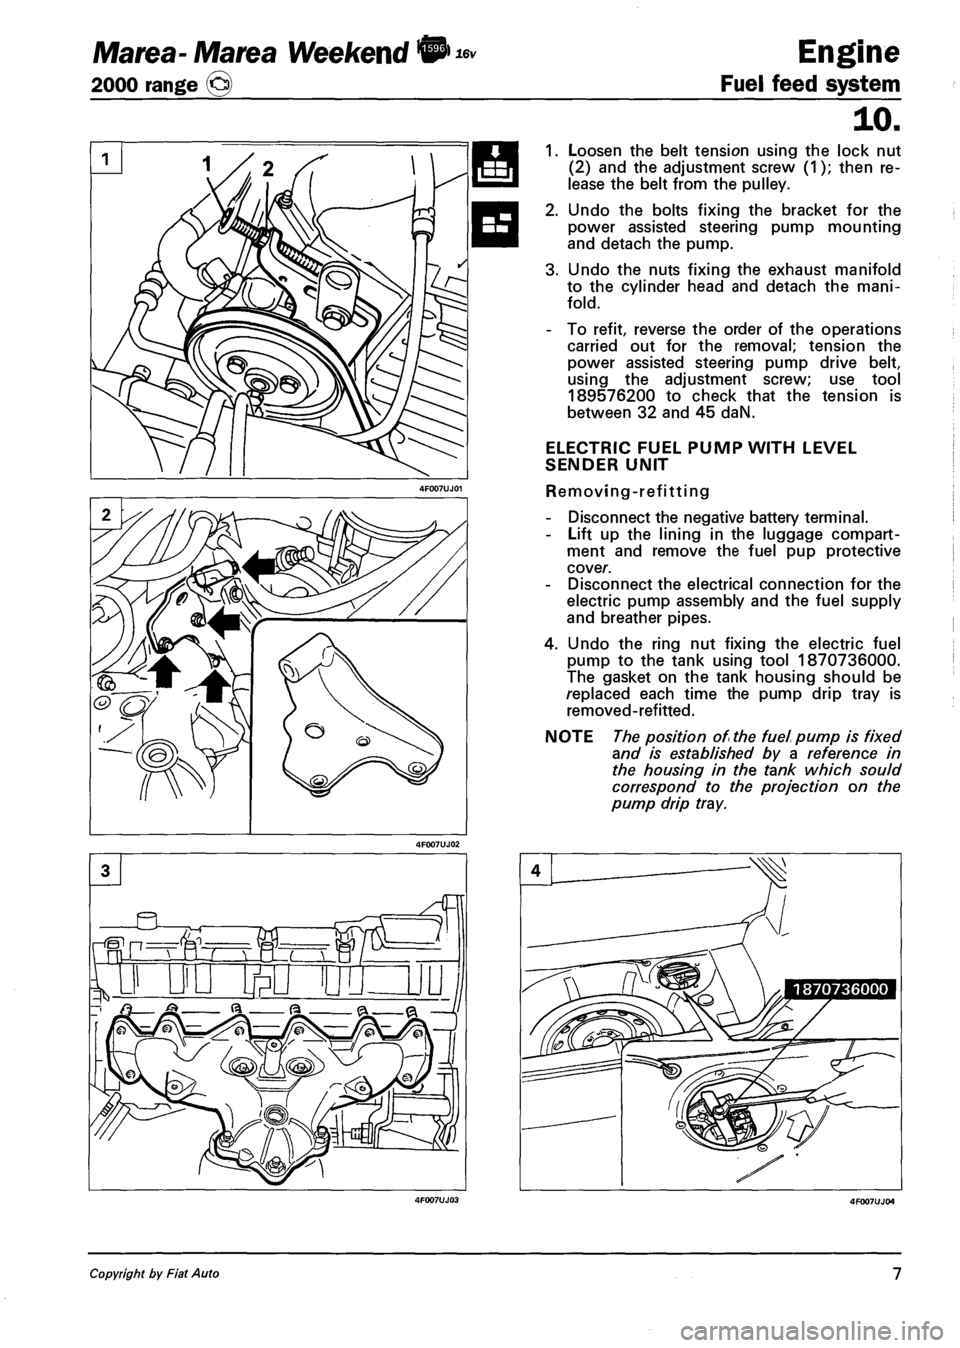 FIAT MAREA 2000 1.G Manual PDF Marea- Marea Weekend • 
2000 range © 
16v Engine 
Fuel feed system 
10. 
1. Loosen the belt tension using the lock nut 
(2) and the adjustment screw (1); then re­
lease the belt from the pulley. 
